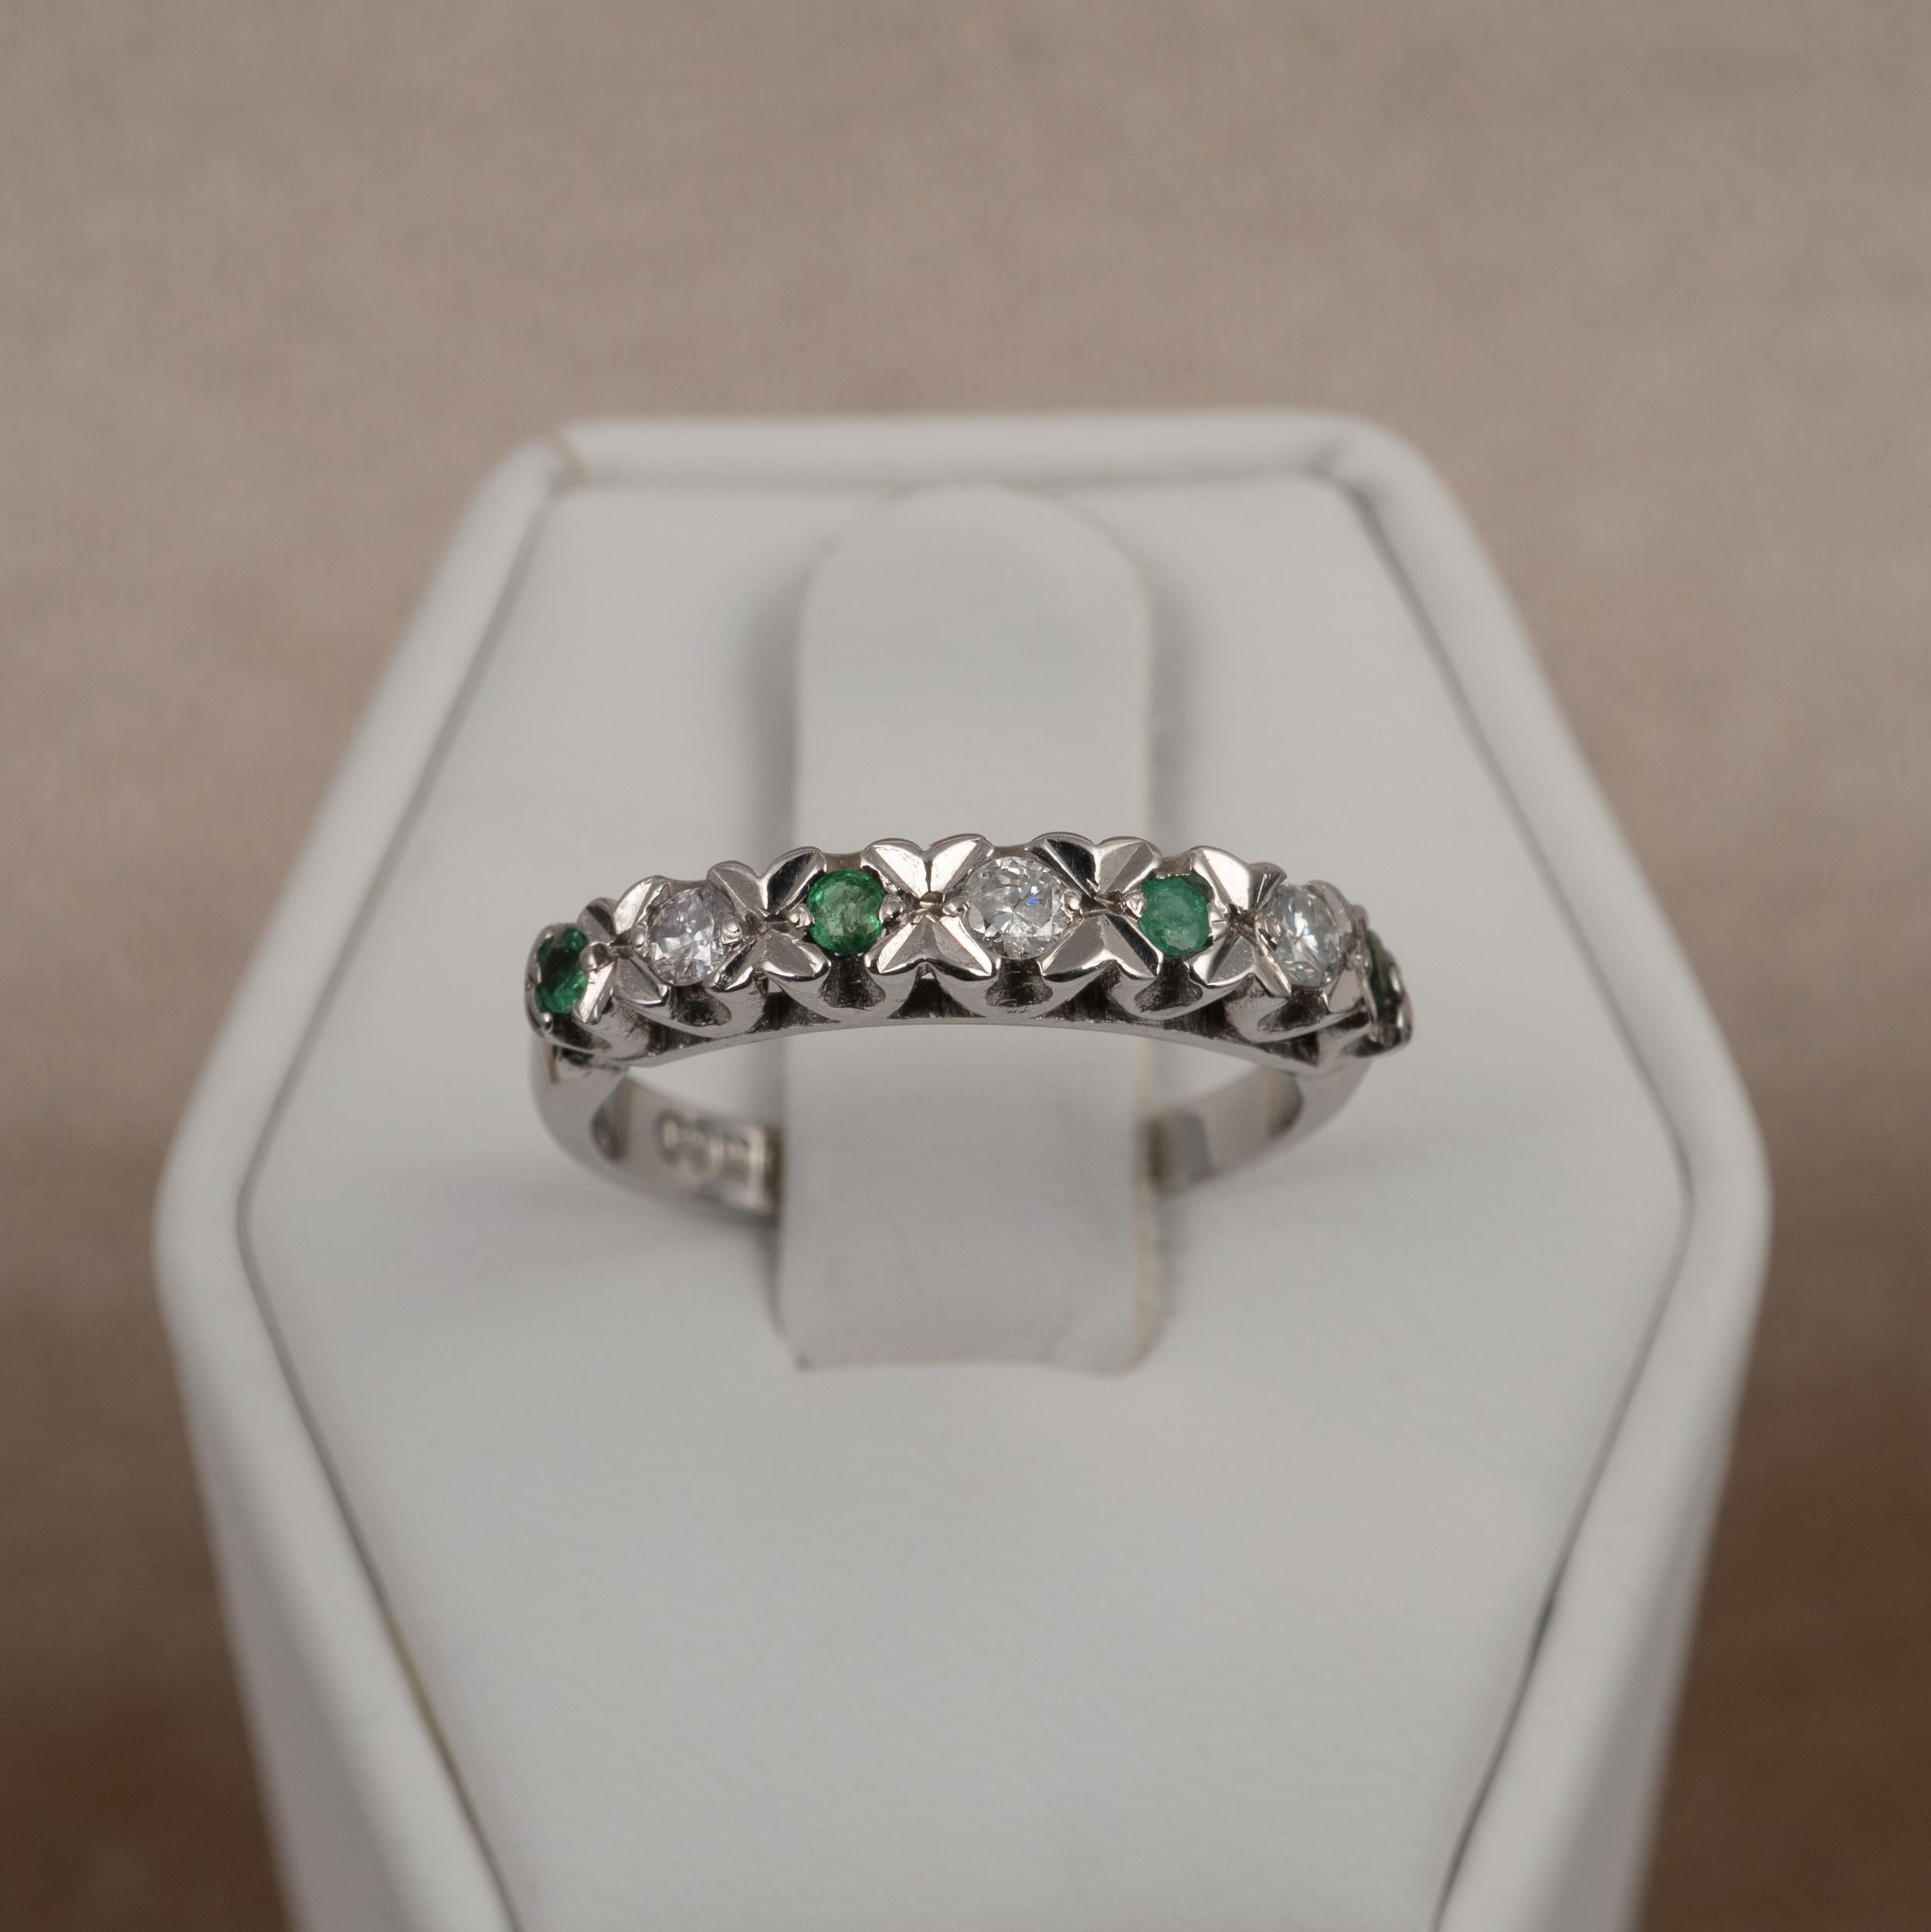 Diamond and Emerald Half Hoop Eternity Ring, White Gold Band In Excellent Condition For Sale In Preston, Lancashire